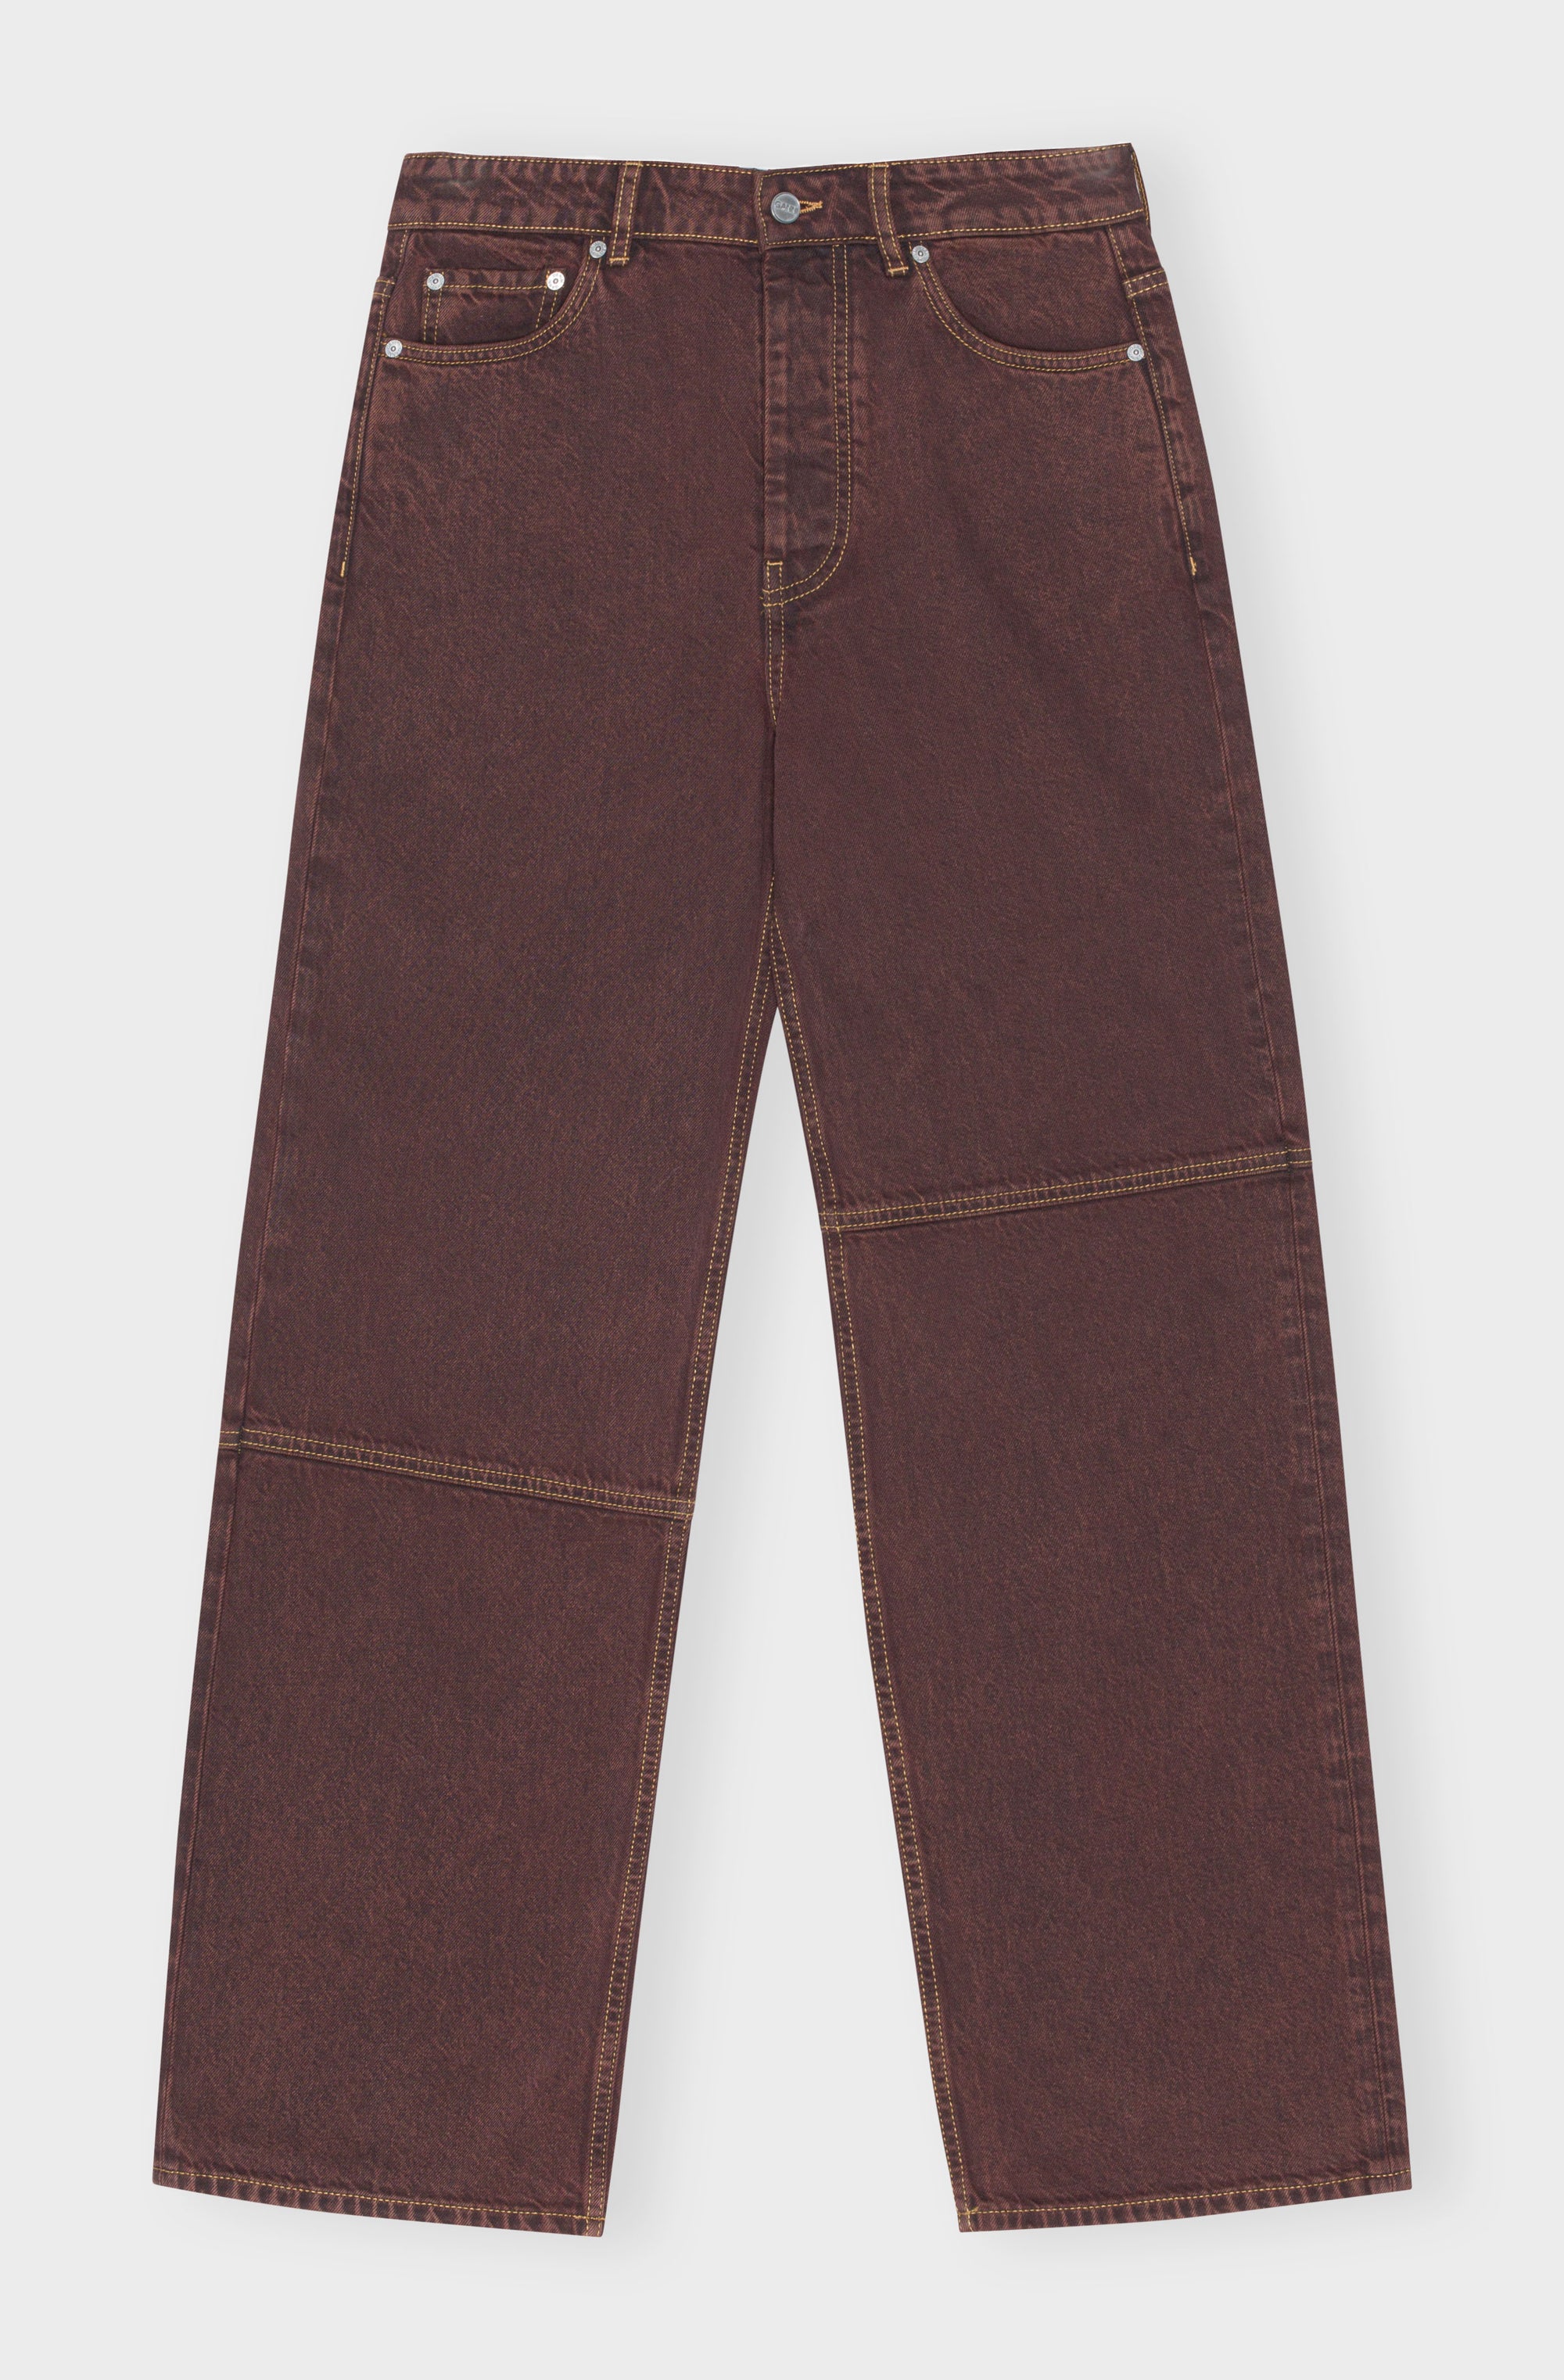 Overbleached Izey Jeans in Shaved Chocolate